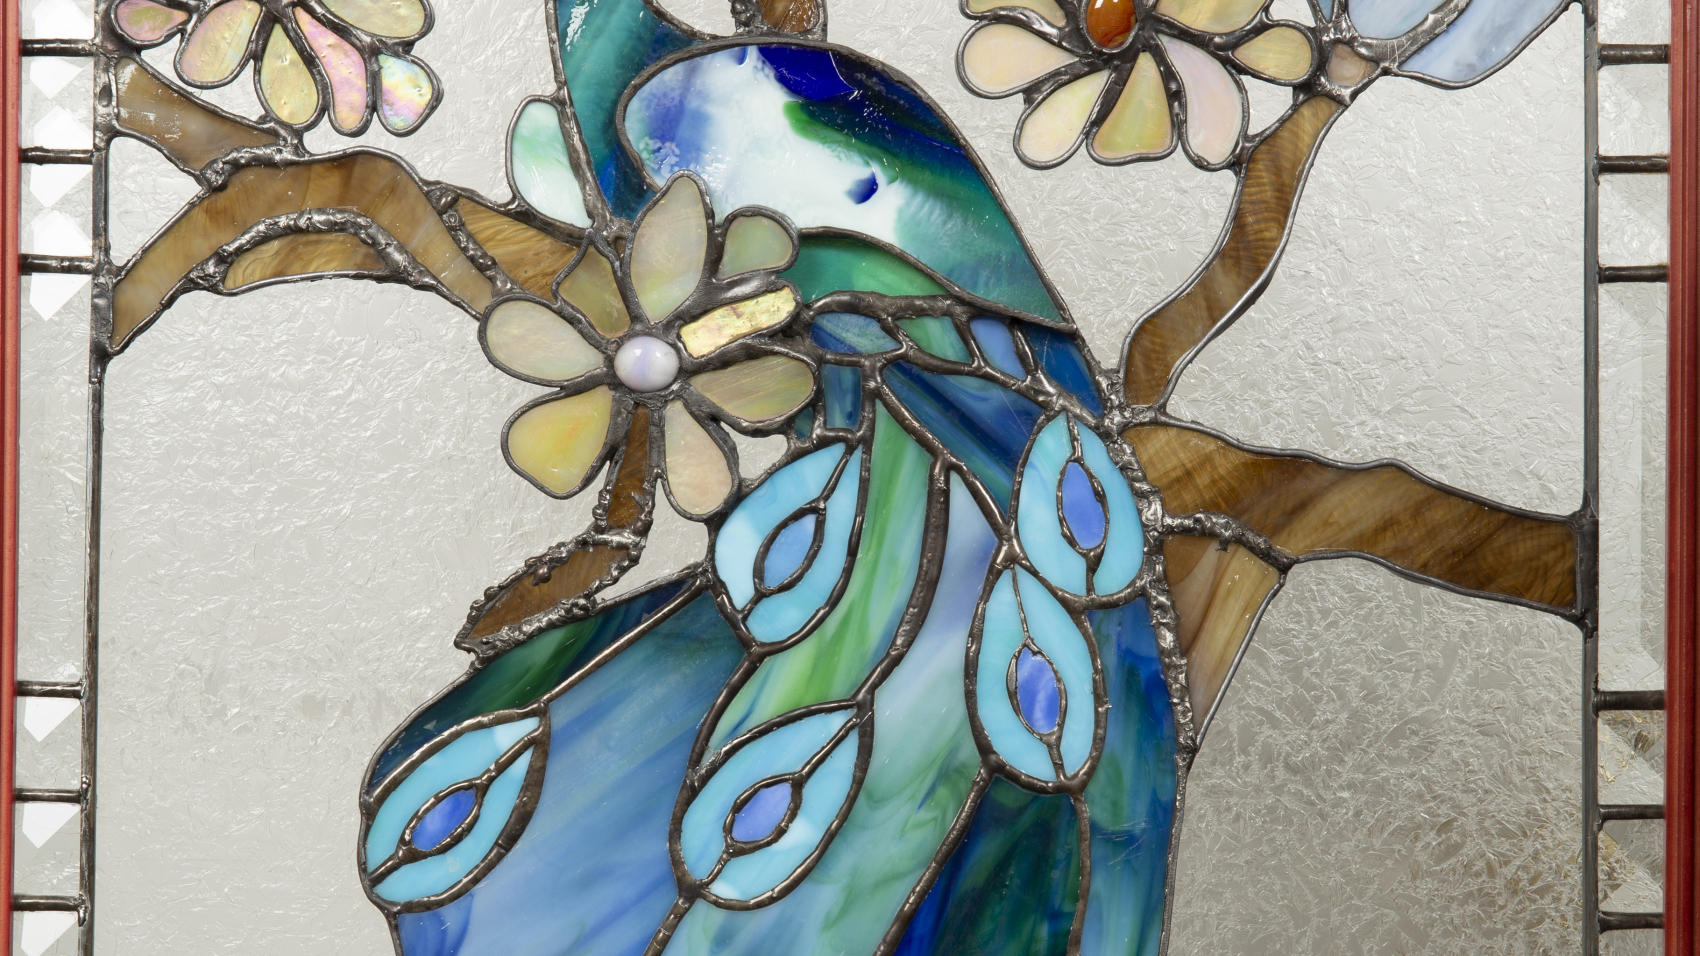 Sculpture 3D - Jasper the Peacock - image of a stained glass peacock in shades of blue on a brown branch with beige and blue flowers.